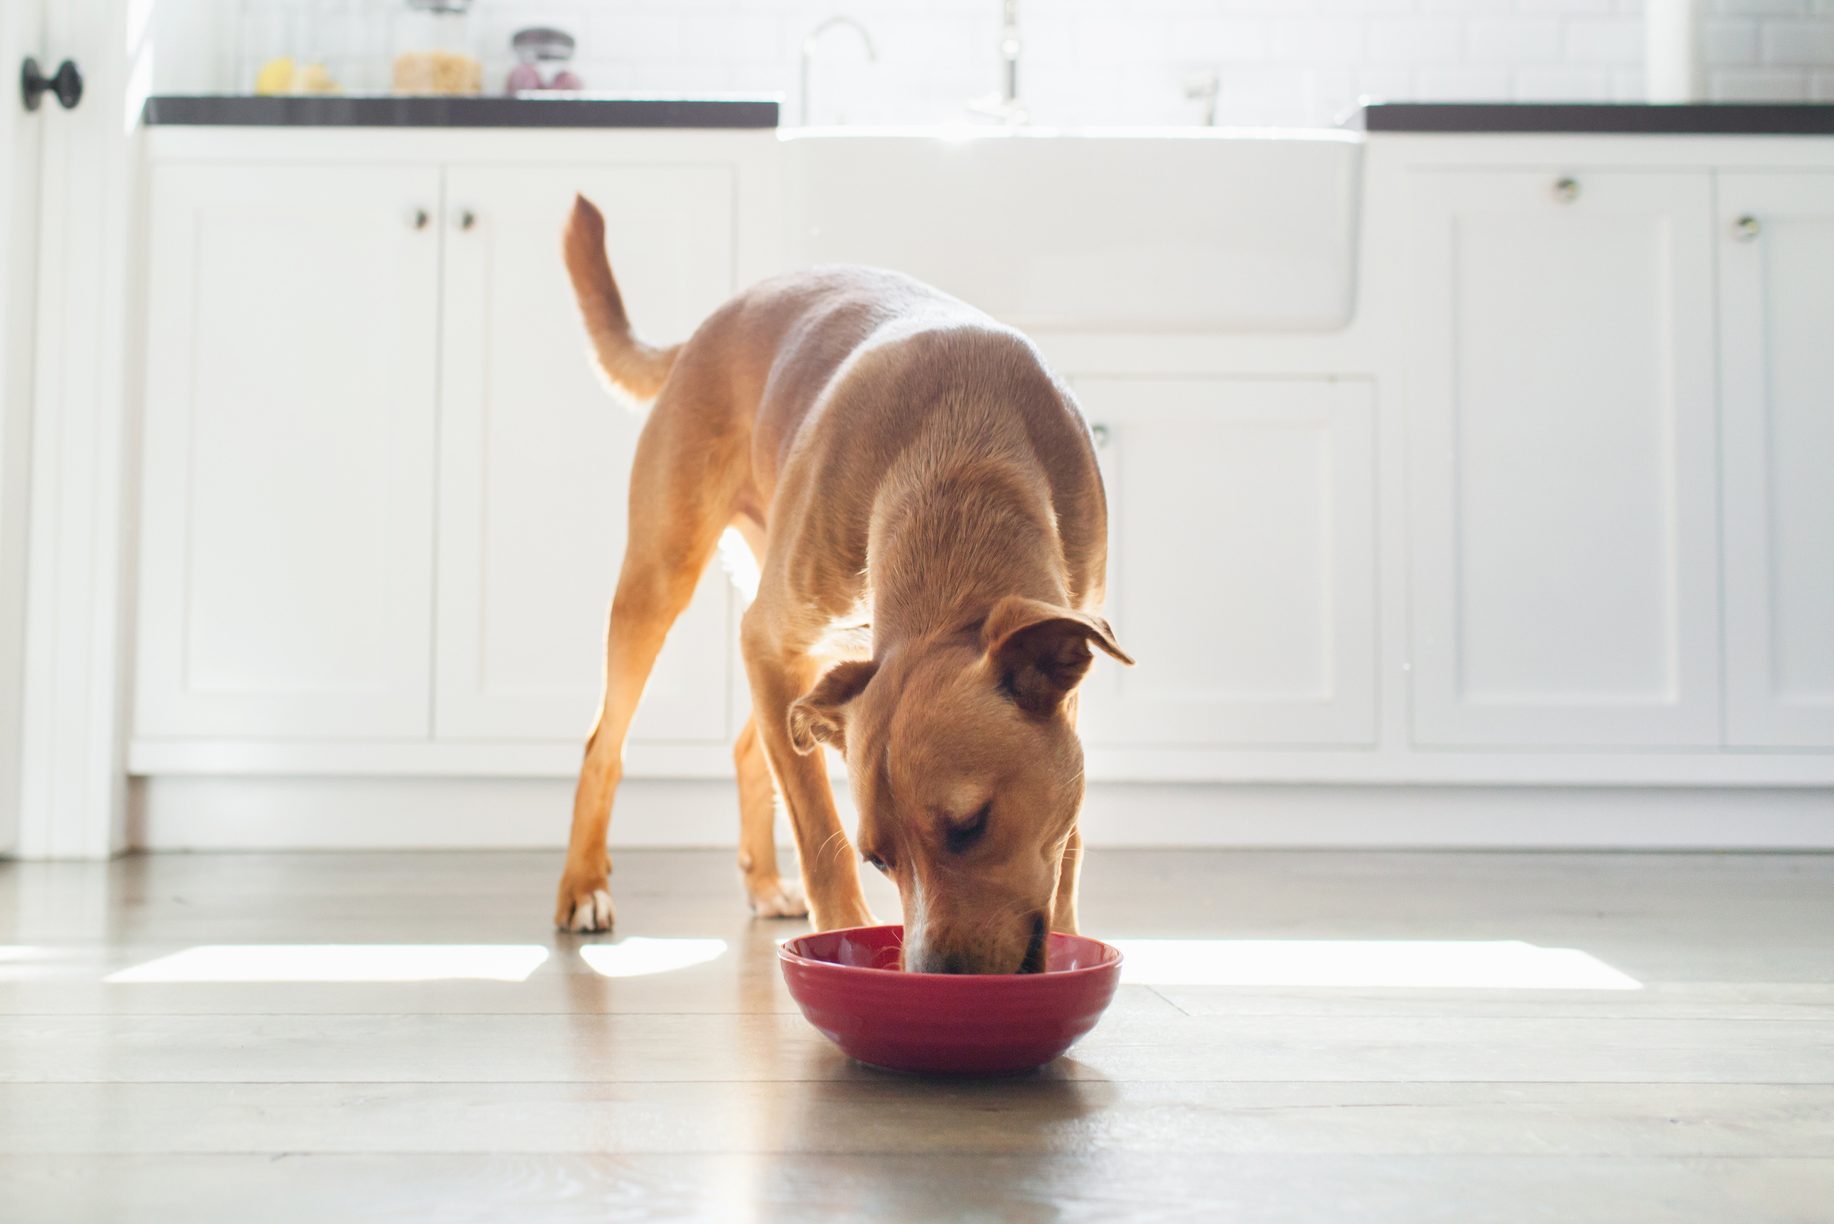 <p>A happy dog has a good appetite and will eagerly chow down at mealtime. "Like us, dogs feel better and are less grouchy when their belly is full," says Bekoff. A reduced appetite or <a href="https://www.rd.com/article/dog-not-eating/" rel="noopener noreferrer">refusal to eat</a> could signal a physical or emotional health issue that warrants attention.</p> <p>As with many other dog behaviors, every dog has their own eating habits and appetite. For example, some dogs may knock you over to get to their food bowl, while other dogs may graze on a few bits of kibble when the mood strikes. Although eating well can indicate a happy dog, it is not a surefire sign of happiness.</p>